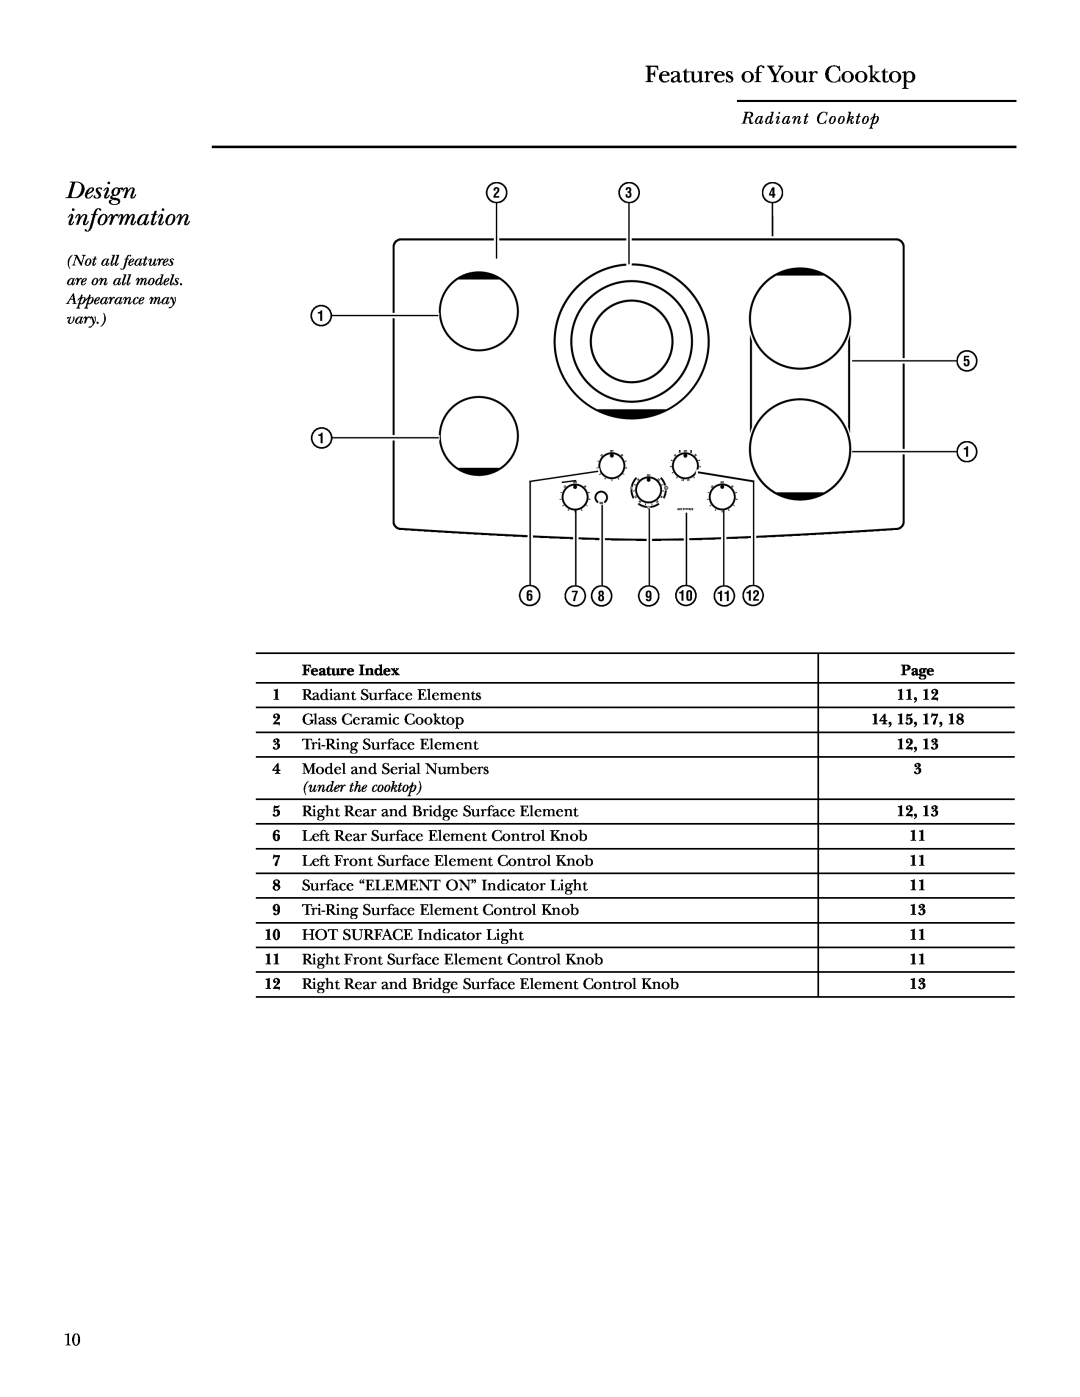 GE ZEU36K owner manual Design information, Features of Your Cooktop, Radiant Cooktop, under the cooktop 